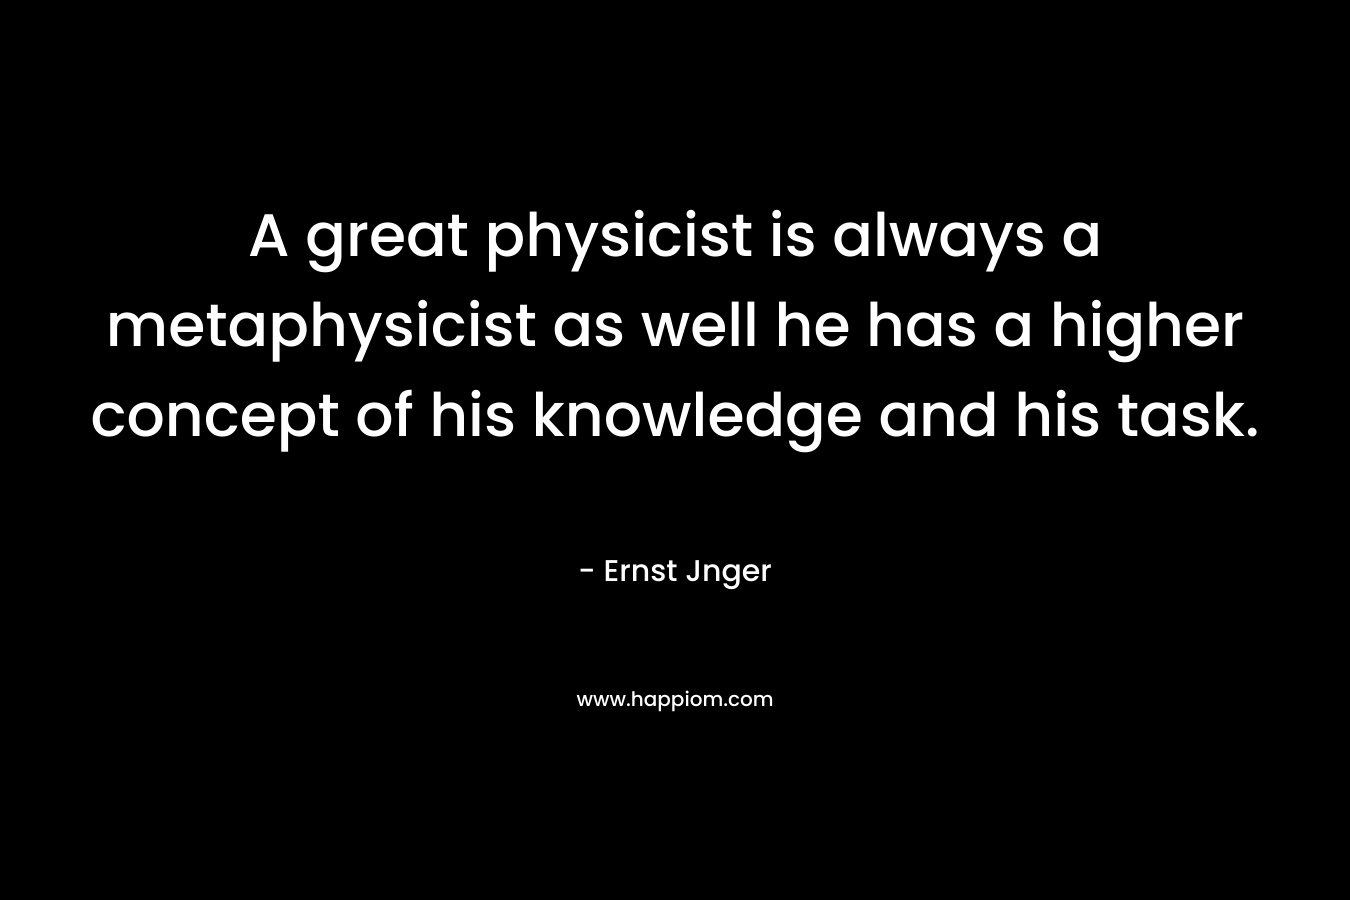 A great physicist is always a metaphysicist as well he has a higher concept of his knowledge and his task. – Ernst Jnger